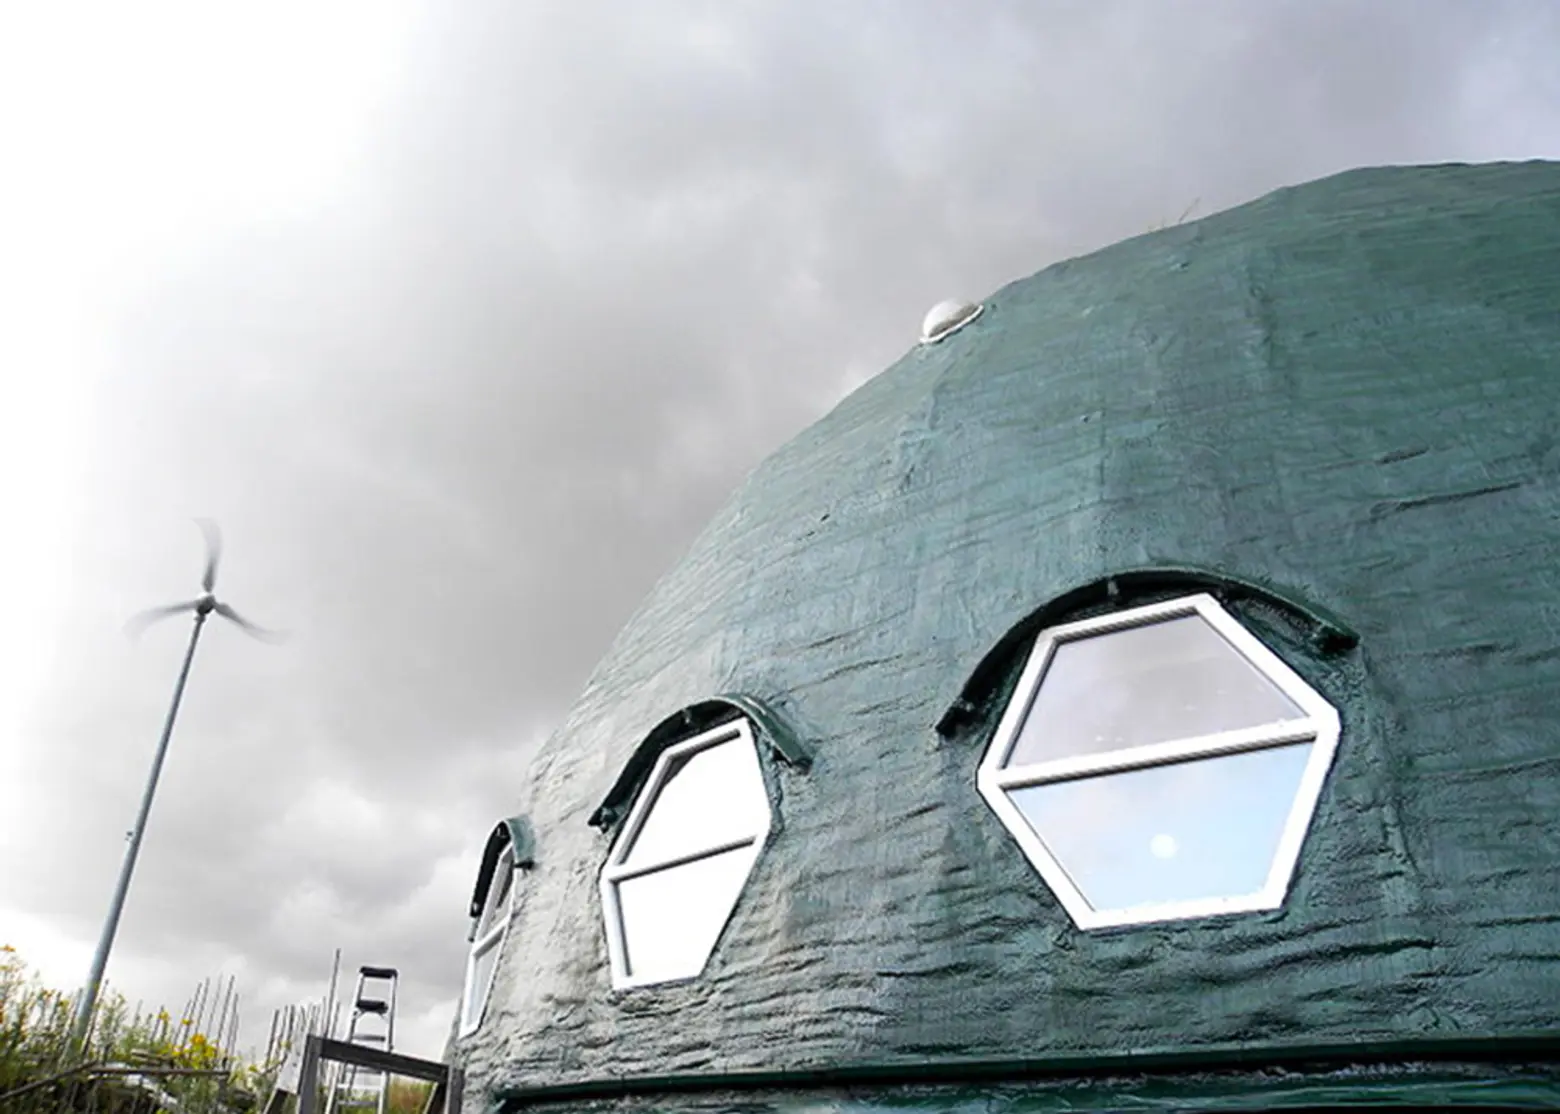 Long Island’s Green Dome is the Largest Geodesic Dome Home in the World